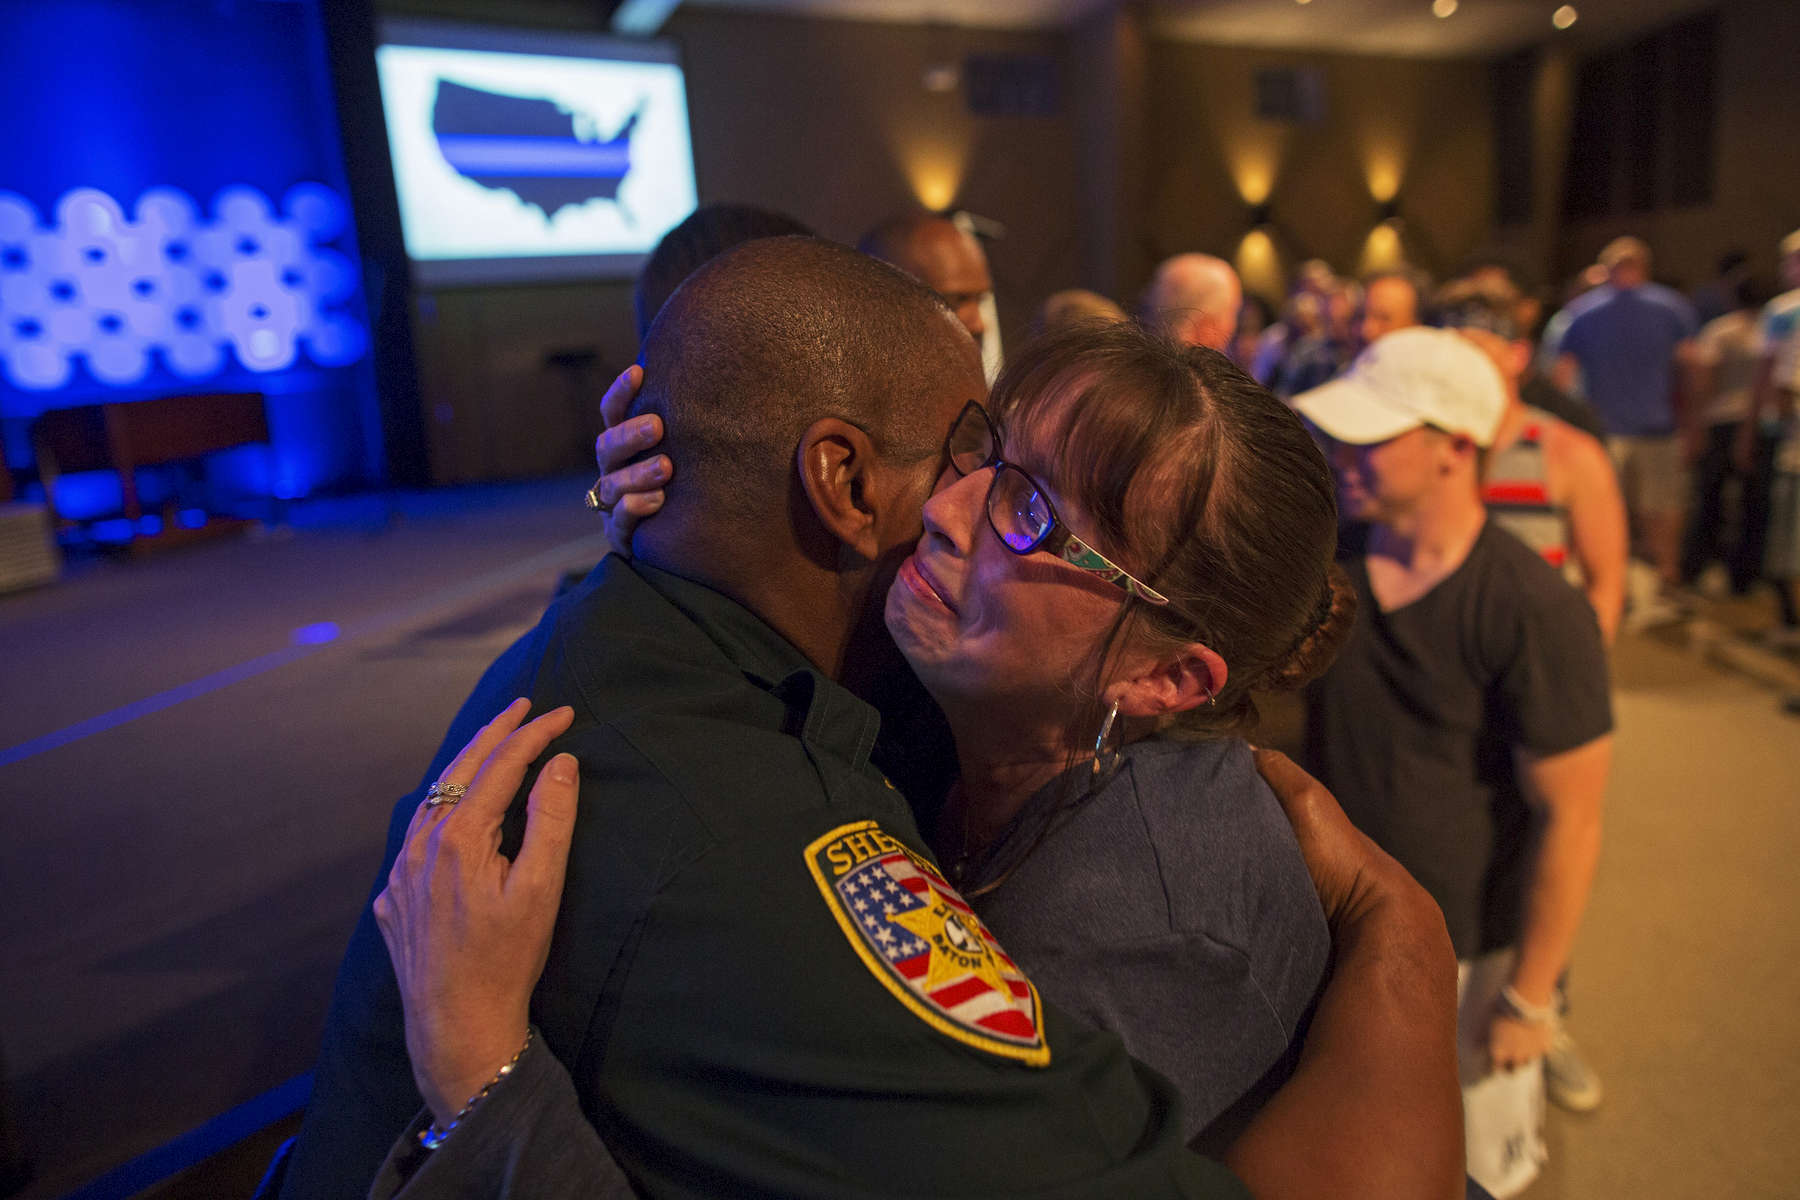 East Baton Rouge Sheriff officer Eddie Guidry, left, is hugged by a teary Terri Carney, both members of The Rock Church on the outskirts of Baton Rouge, during a prayer vigil for the officers killed and wounded by a gunman on Sunday in Zachary, La. USA, Monday, July 18, 2016. About 100 people came to the special hour-long prayer vigil. Col. Michael Edmonson, superintendent of the Louisiana State Police, said at a news conference that day: “There is no doubt whatsoever that these officers were intentionally targeted and assassinated.{quote} (AP Photo/Max Becherer)